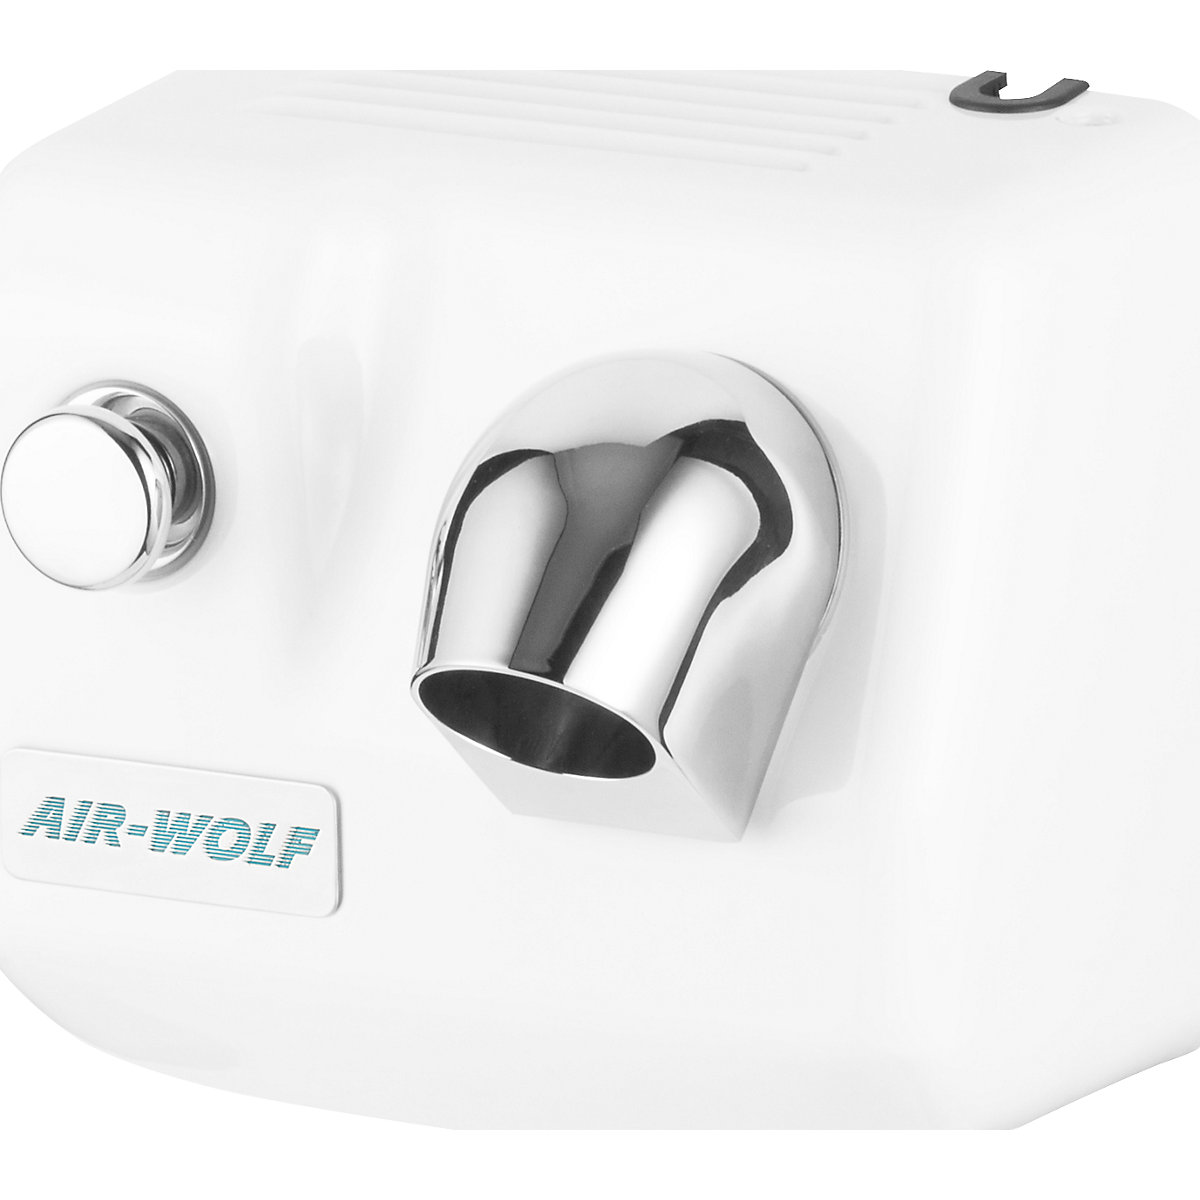 Wall-mounted hair dryer - AIR-WOLF